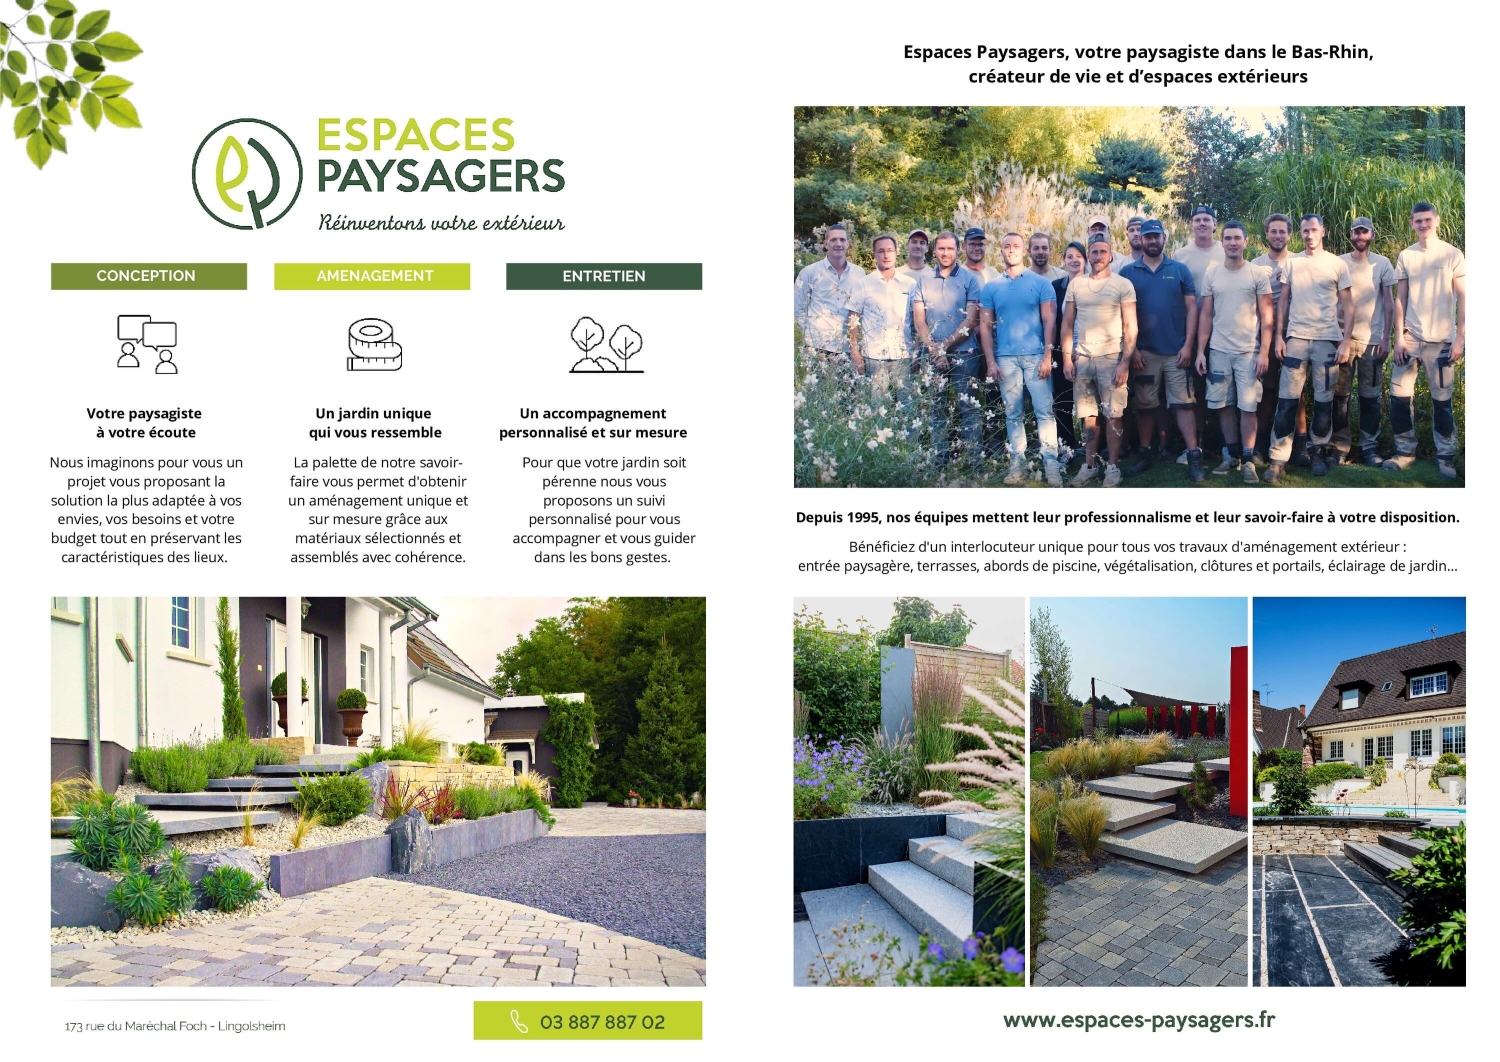 ESPACES PAYSAGERS